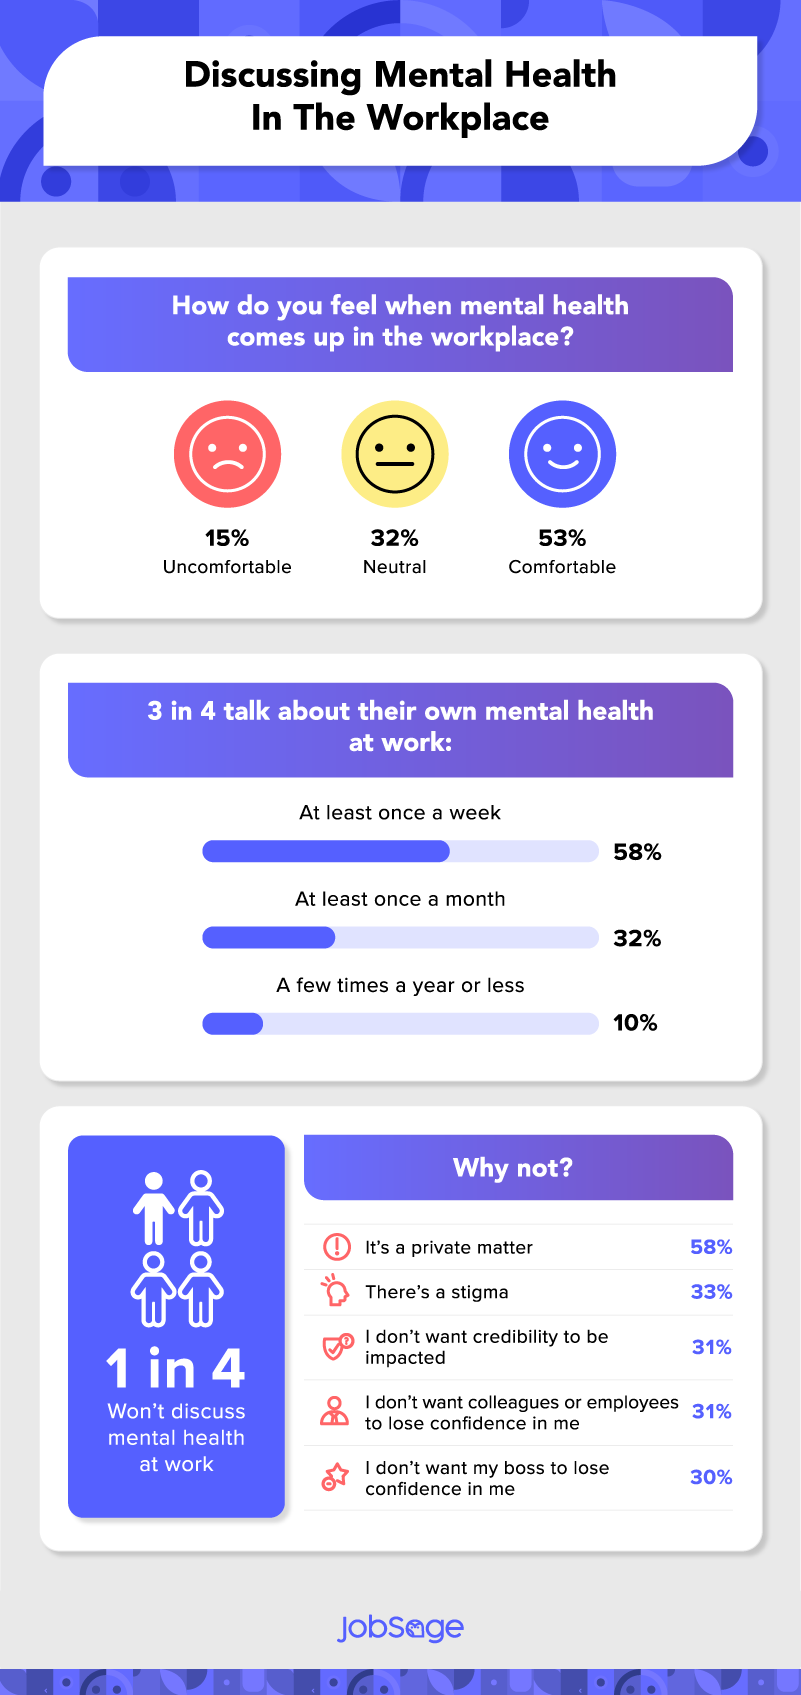 how many people have discussed mental health with colleagues or managers